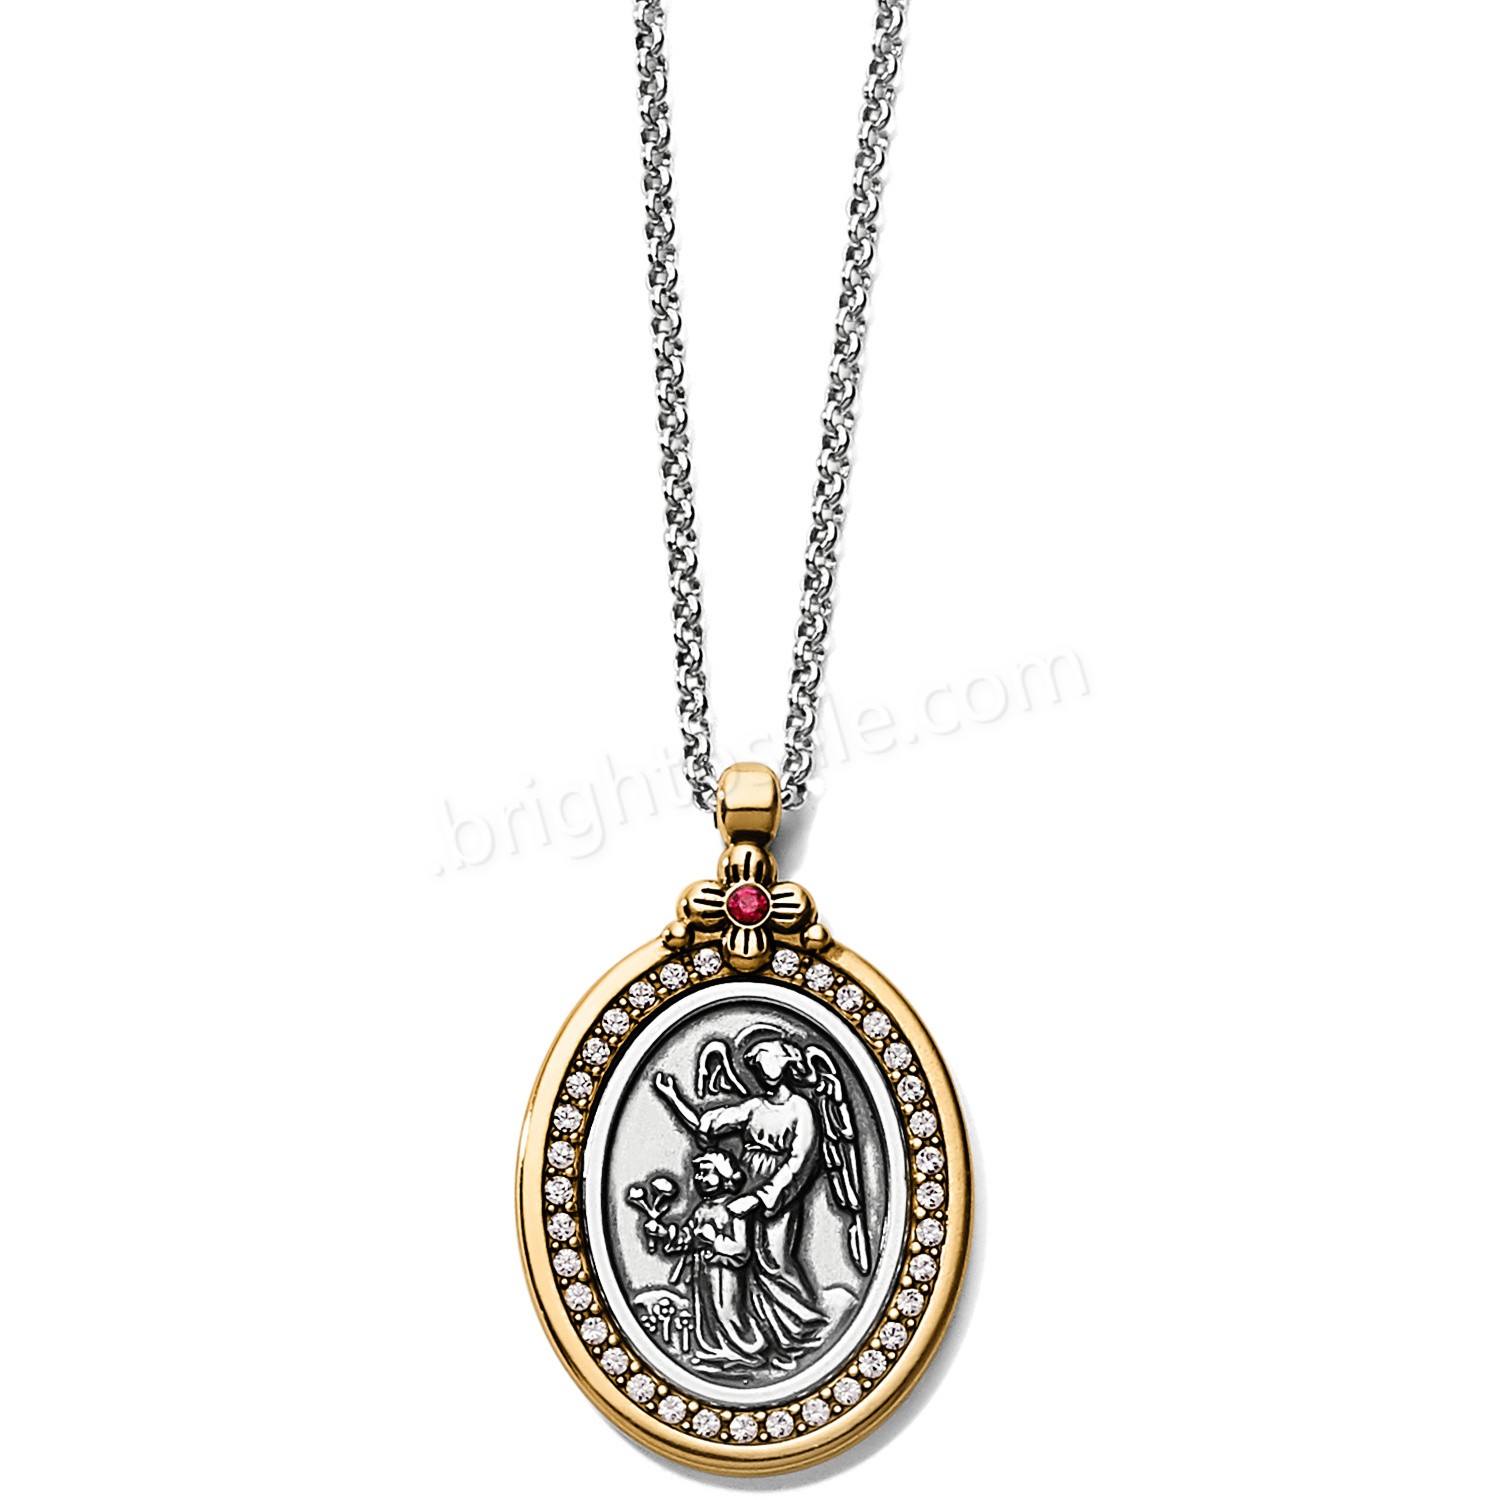 Brighton Collectibles & Online Discount Guardian Angel Two-Tone Pendant Necklace - Brighton Collectibles & Online Discount Guardian Angel Two-Tone Pendant Necklace